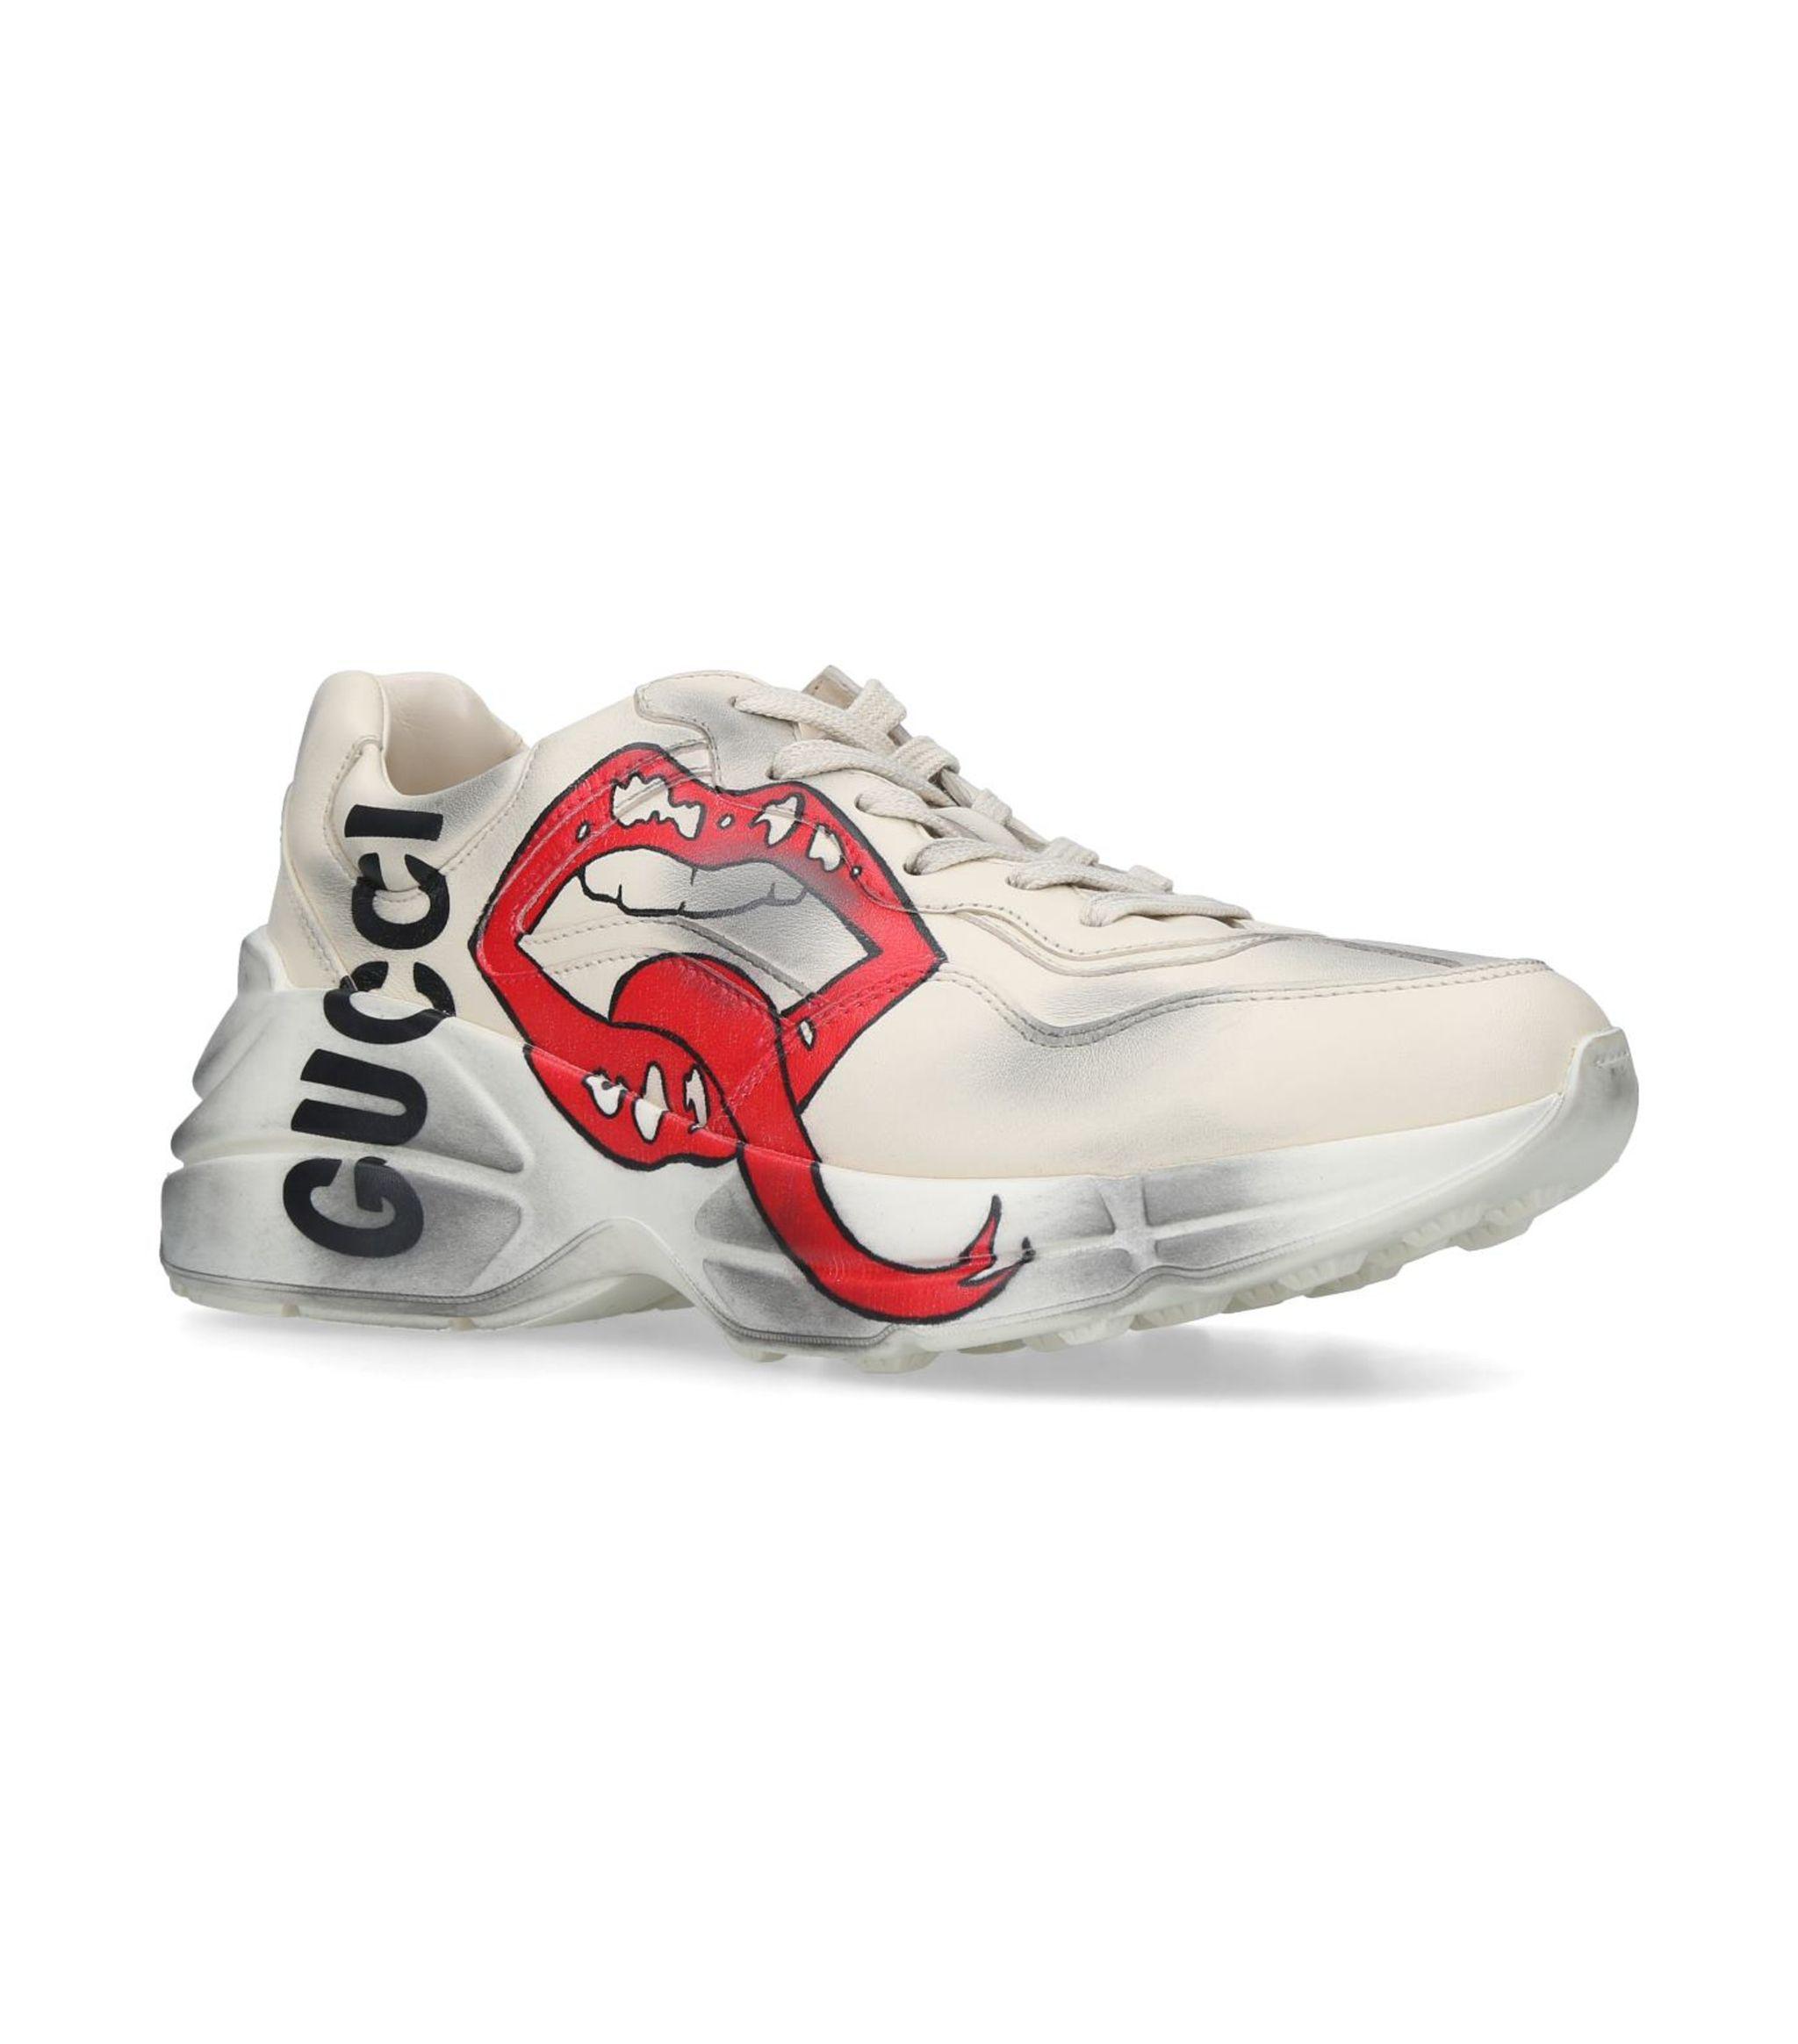 Gucci Leather Rhyton Sneakers - Lyst